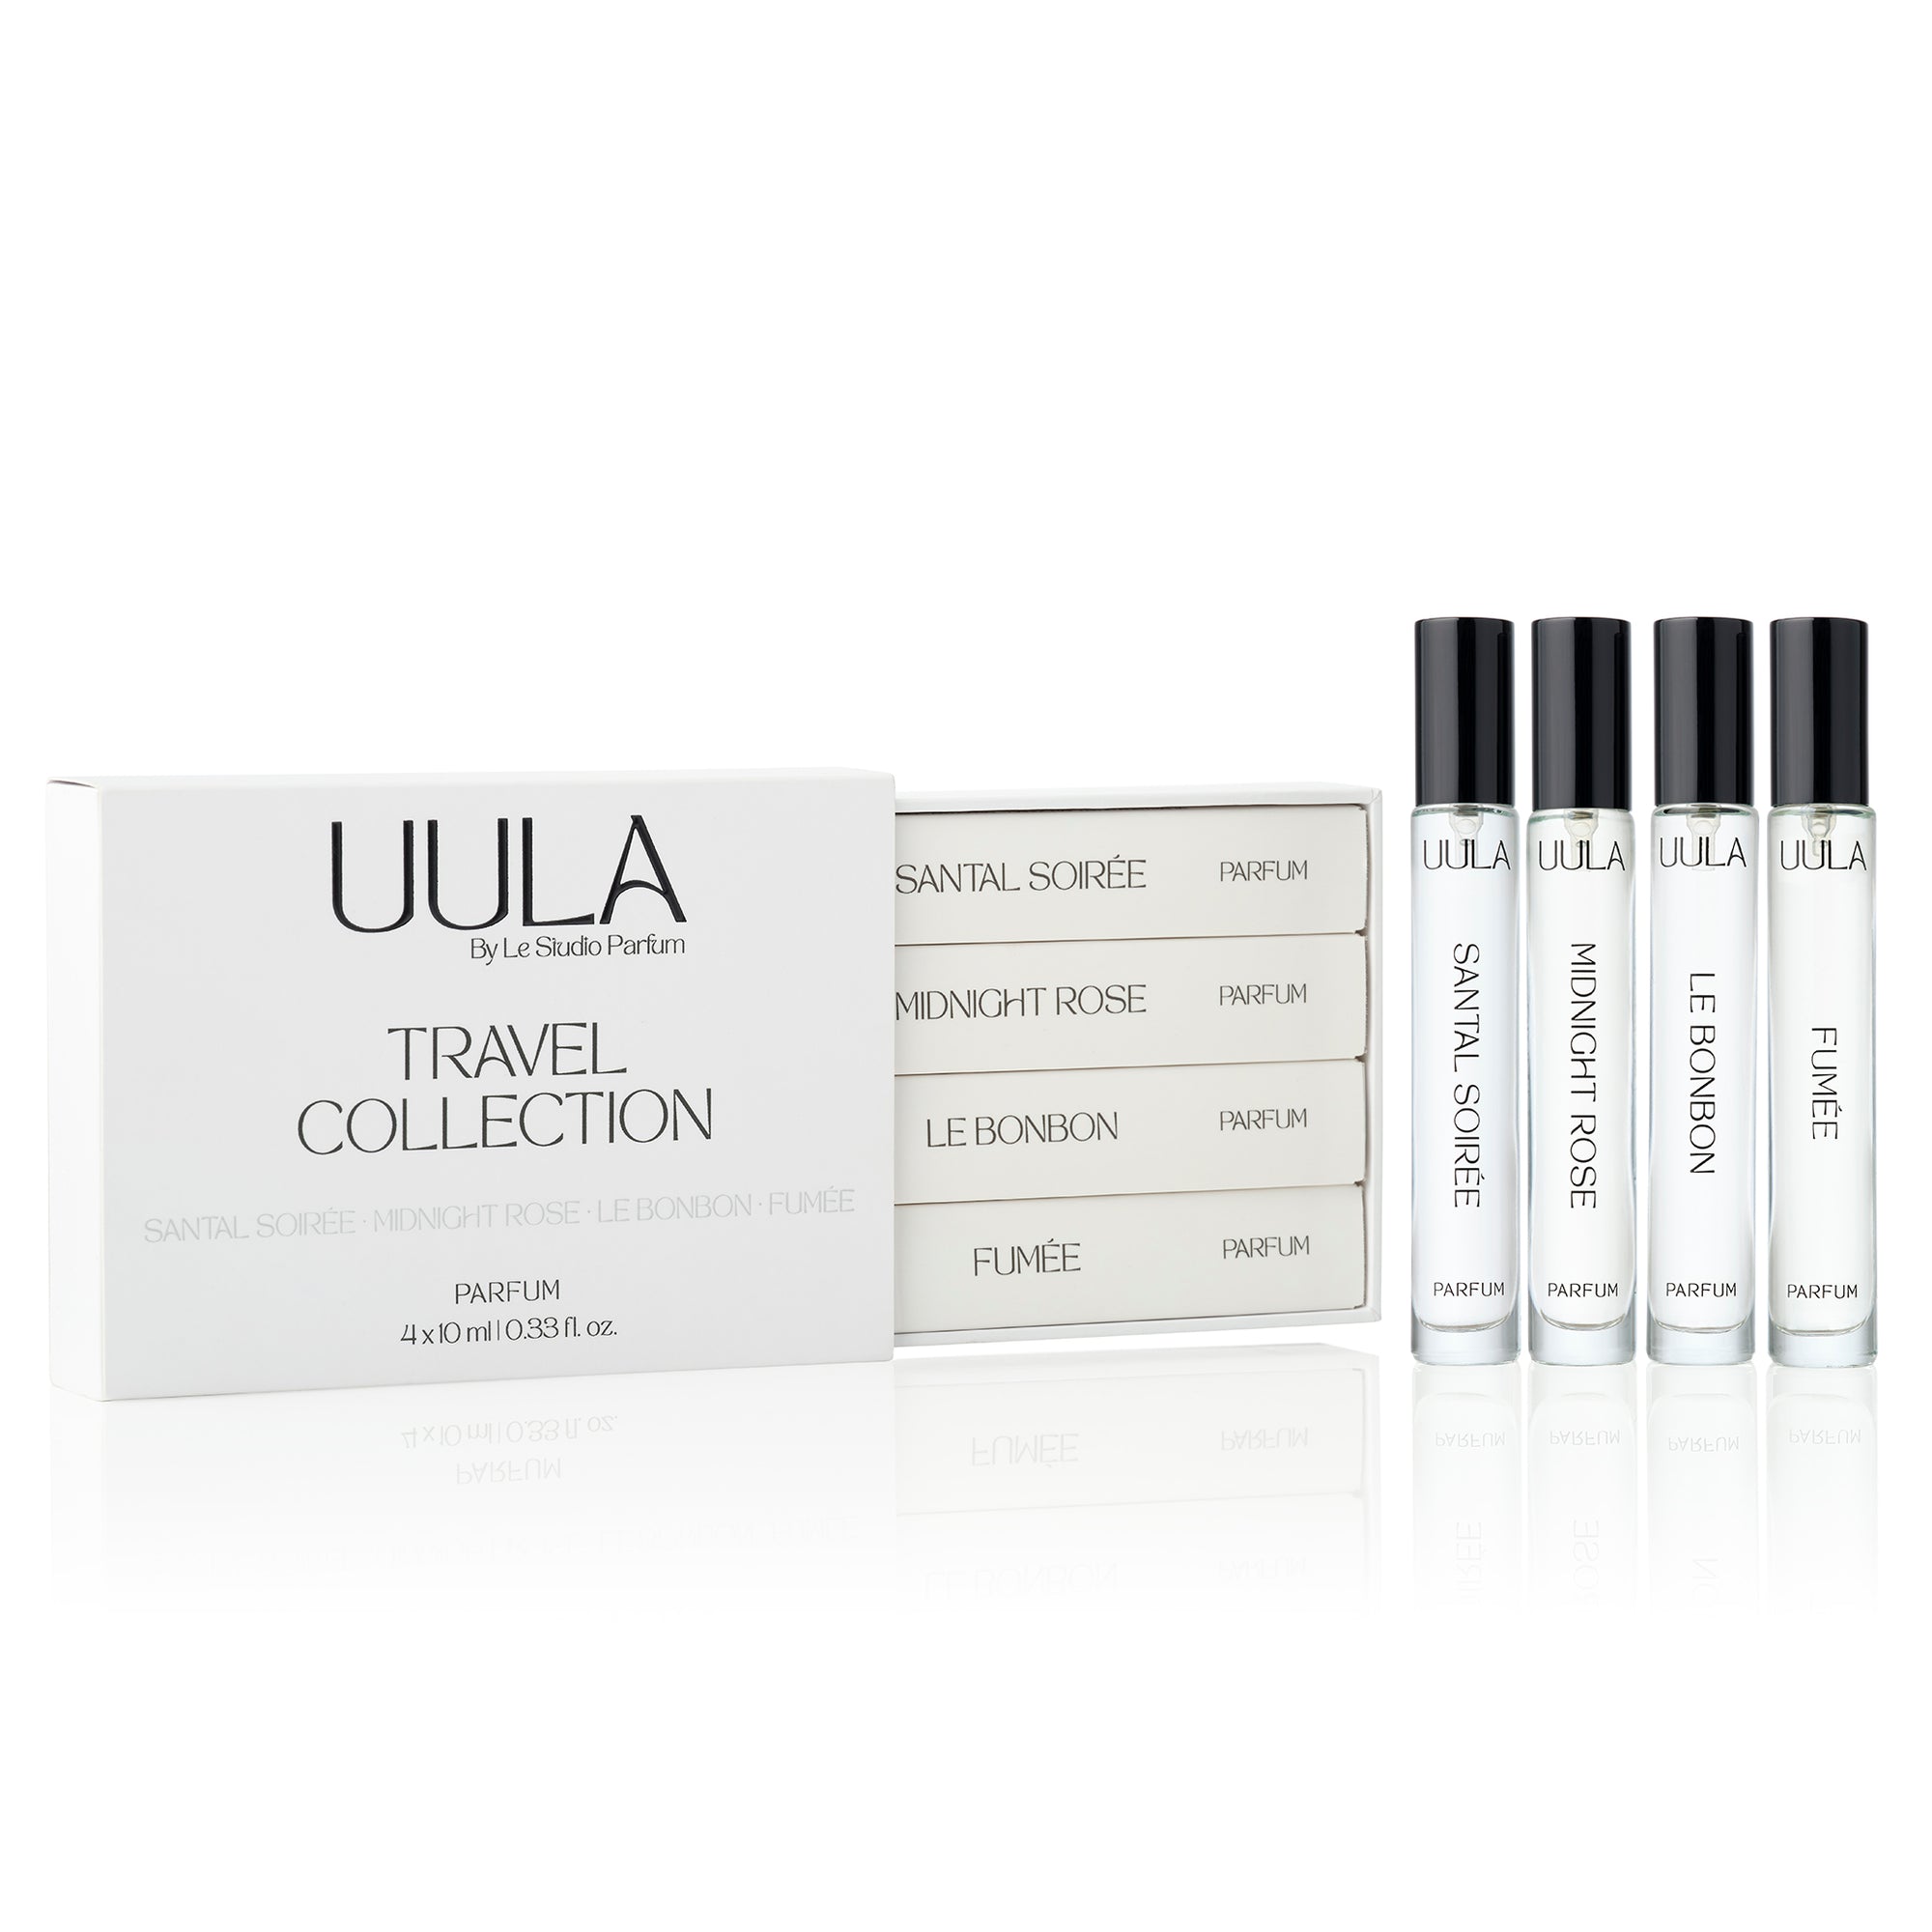 A luxurious box containing the UULA Travel Collection, showcasing four 10 ml fragrances. The collection is described as a perfume passport with scents for various occasions, including exotic sunsets, sophisticated evenings, starlit adventures, and joyous moments. The image conveys elegance and versatility.